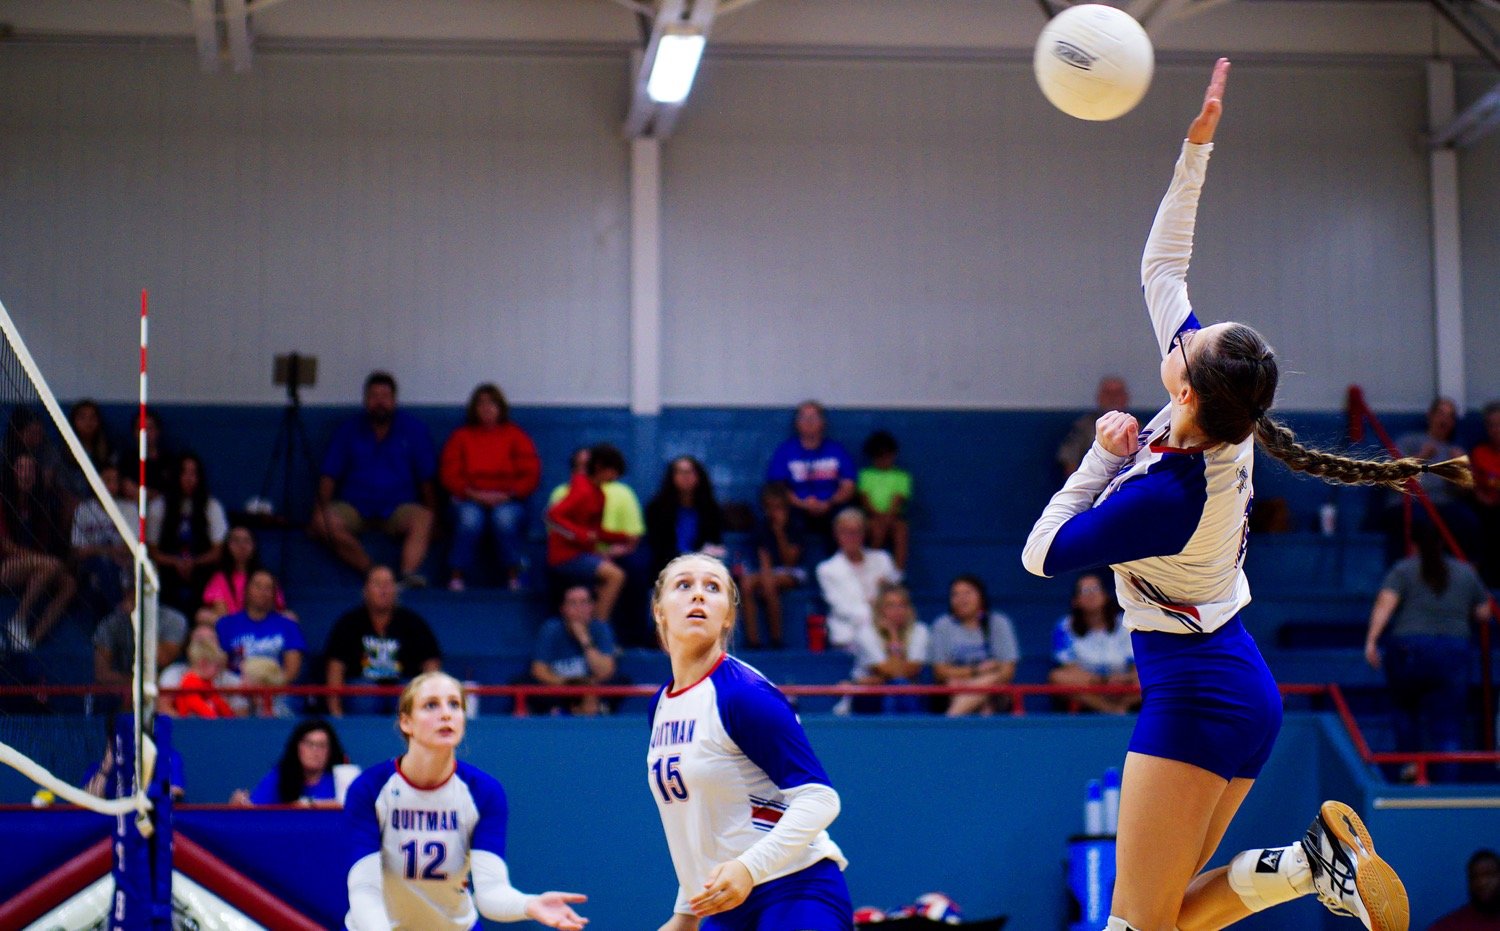 Emilee Baker swats a ball back to the Lady Devilis from midcourt. [view more volleyball shots]